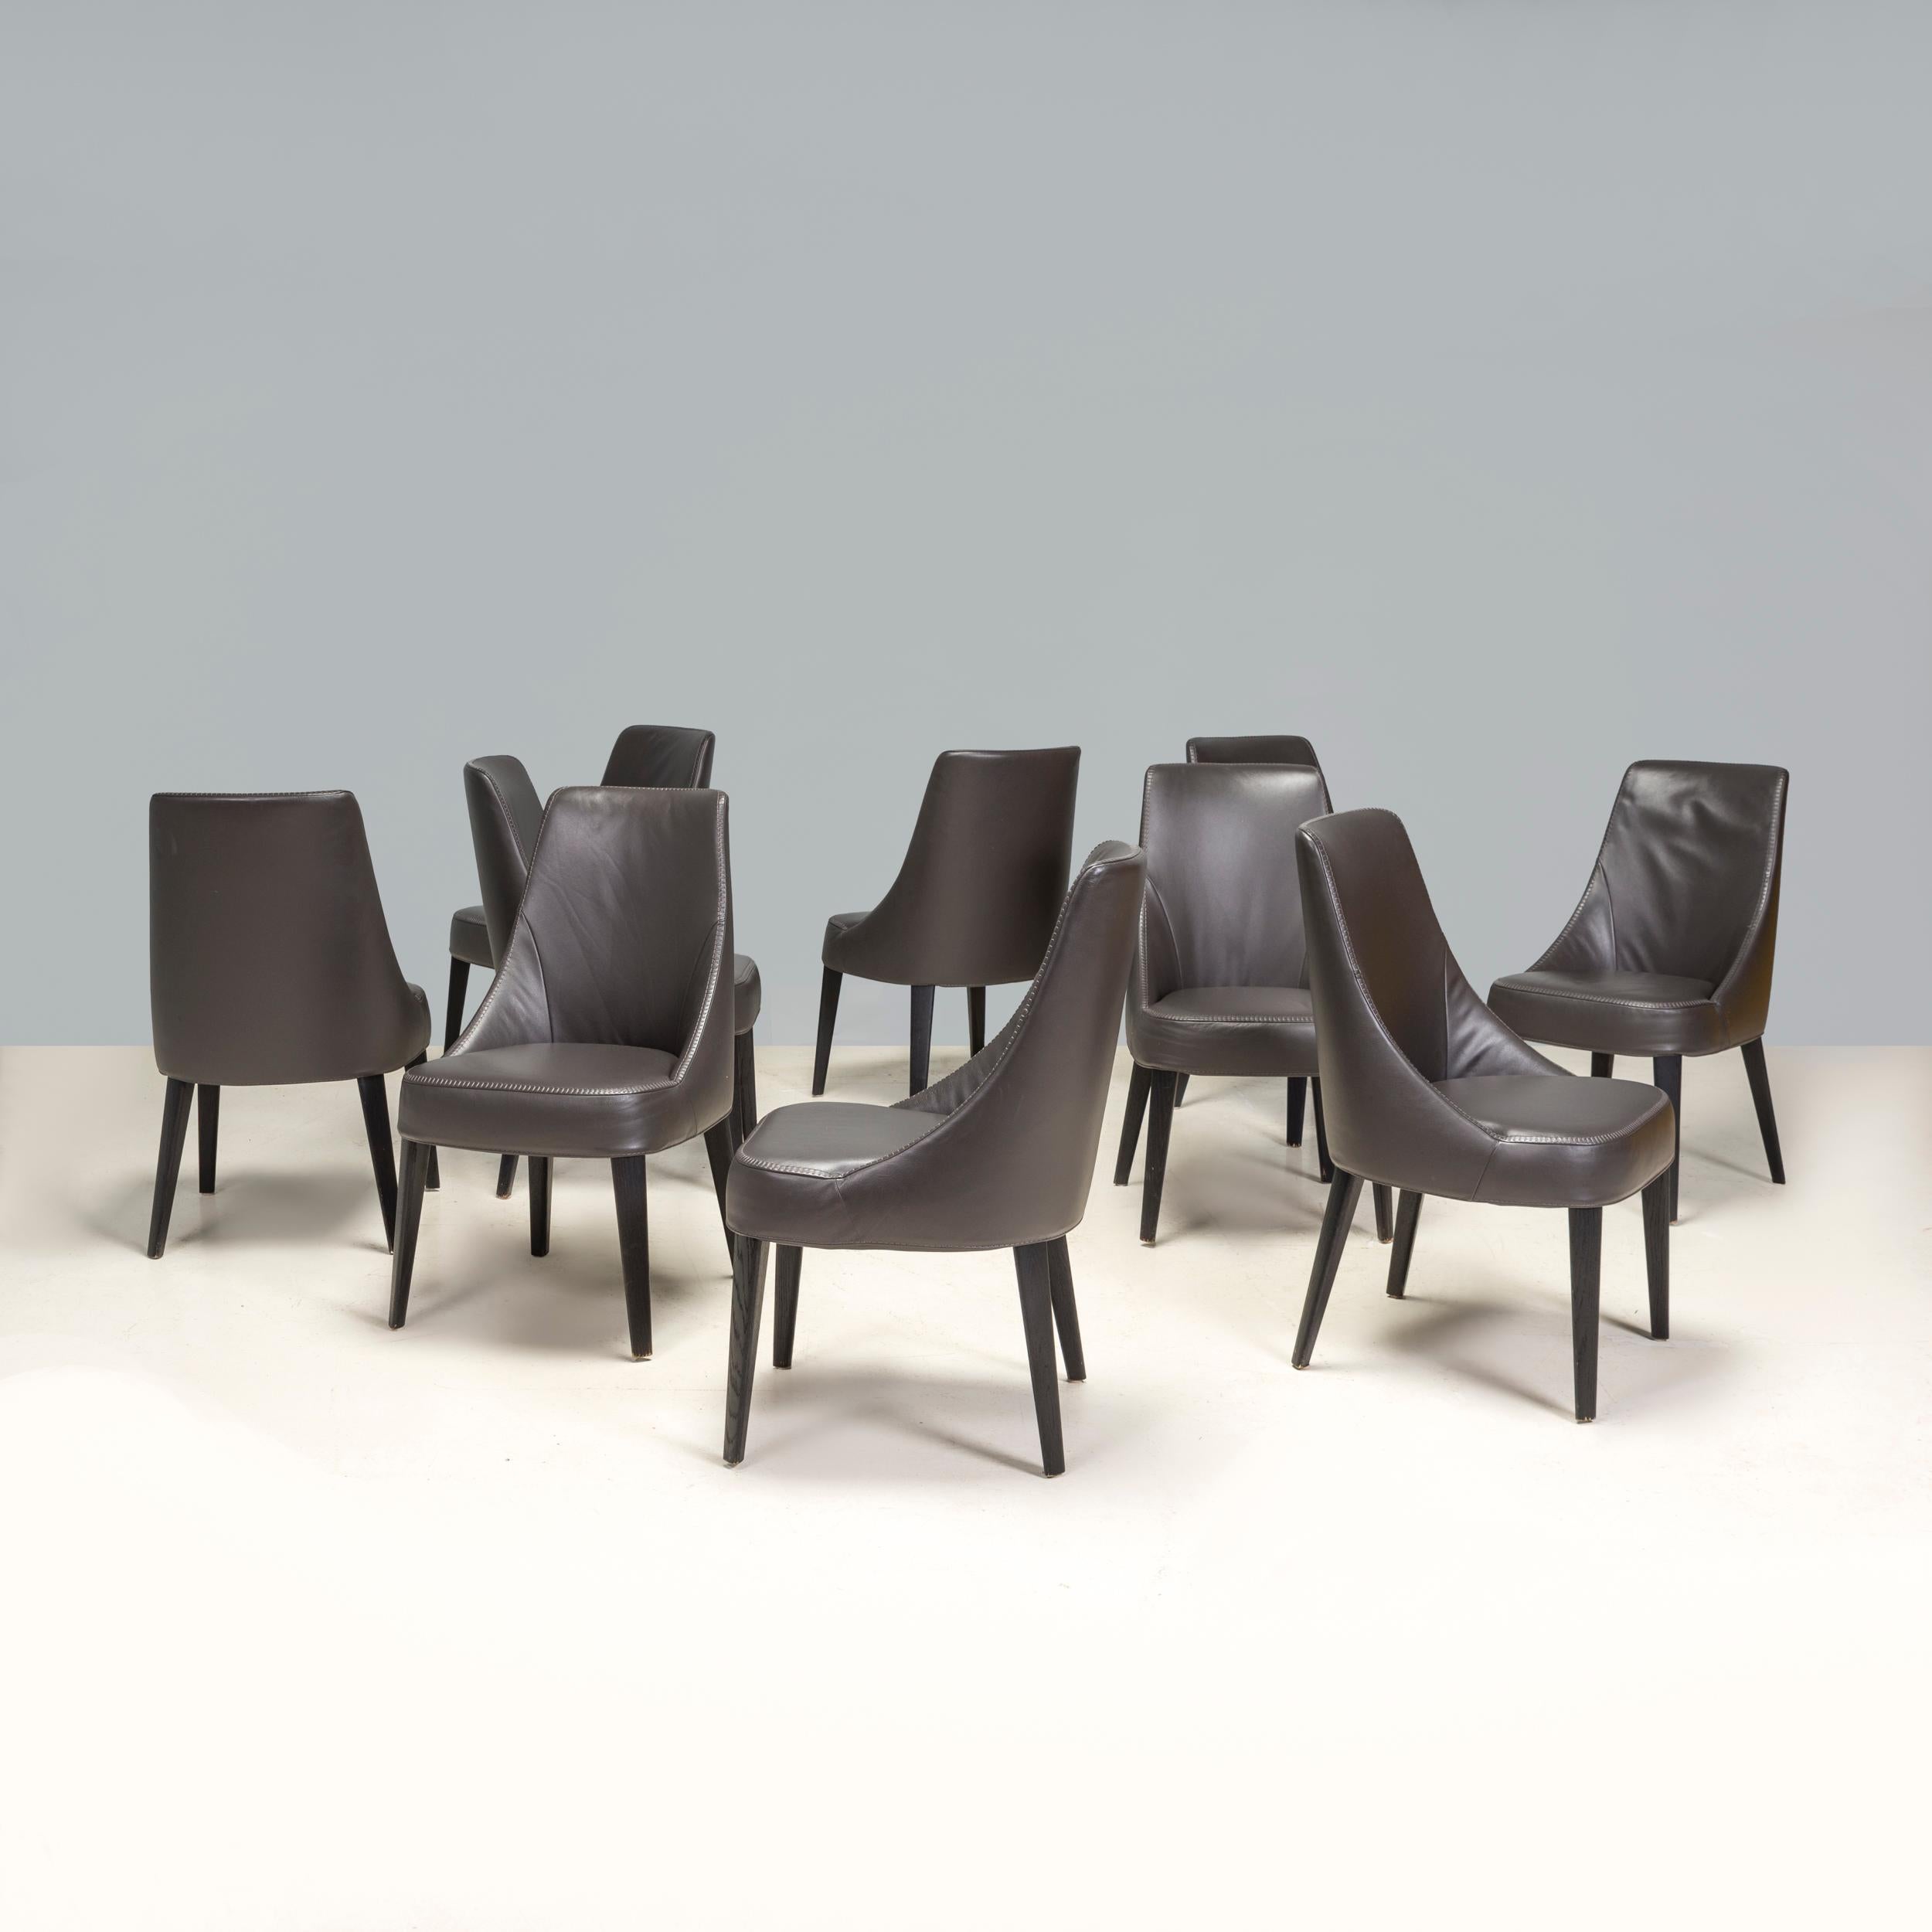 Originally designed by Antonio Citterio for Maxalto in 2008, the Febo dining chair is a fantastic example of modern Italian design. 

The chairs are constructed from a tubular steel frame and are finished with dark stained wooden legs, creating a